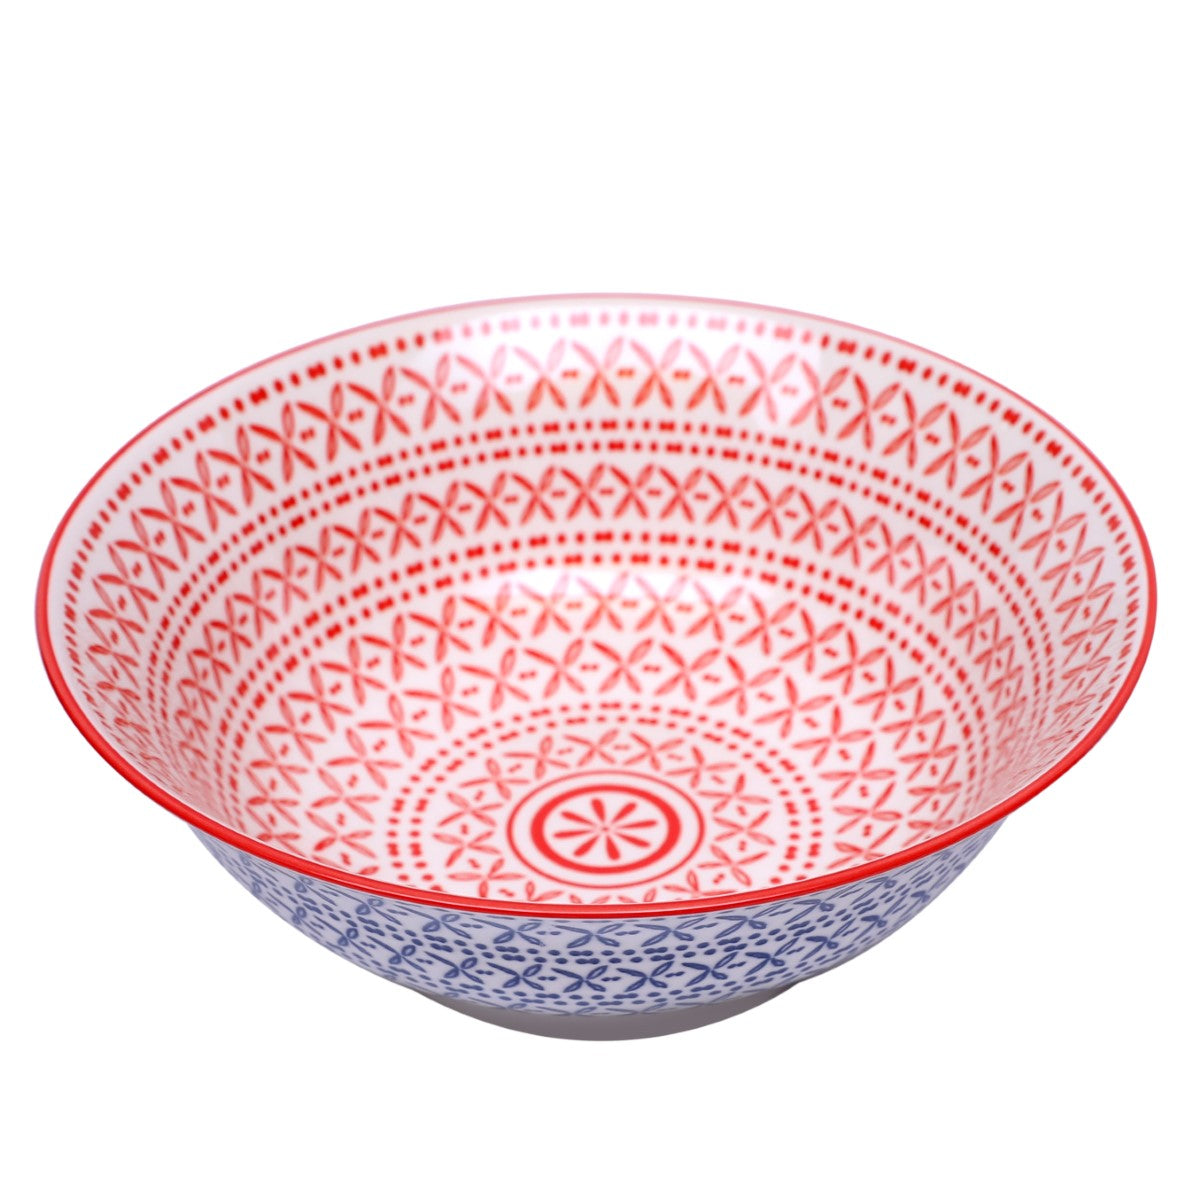 8Inch Serving Bowl.80FKW 2008